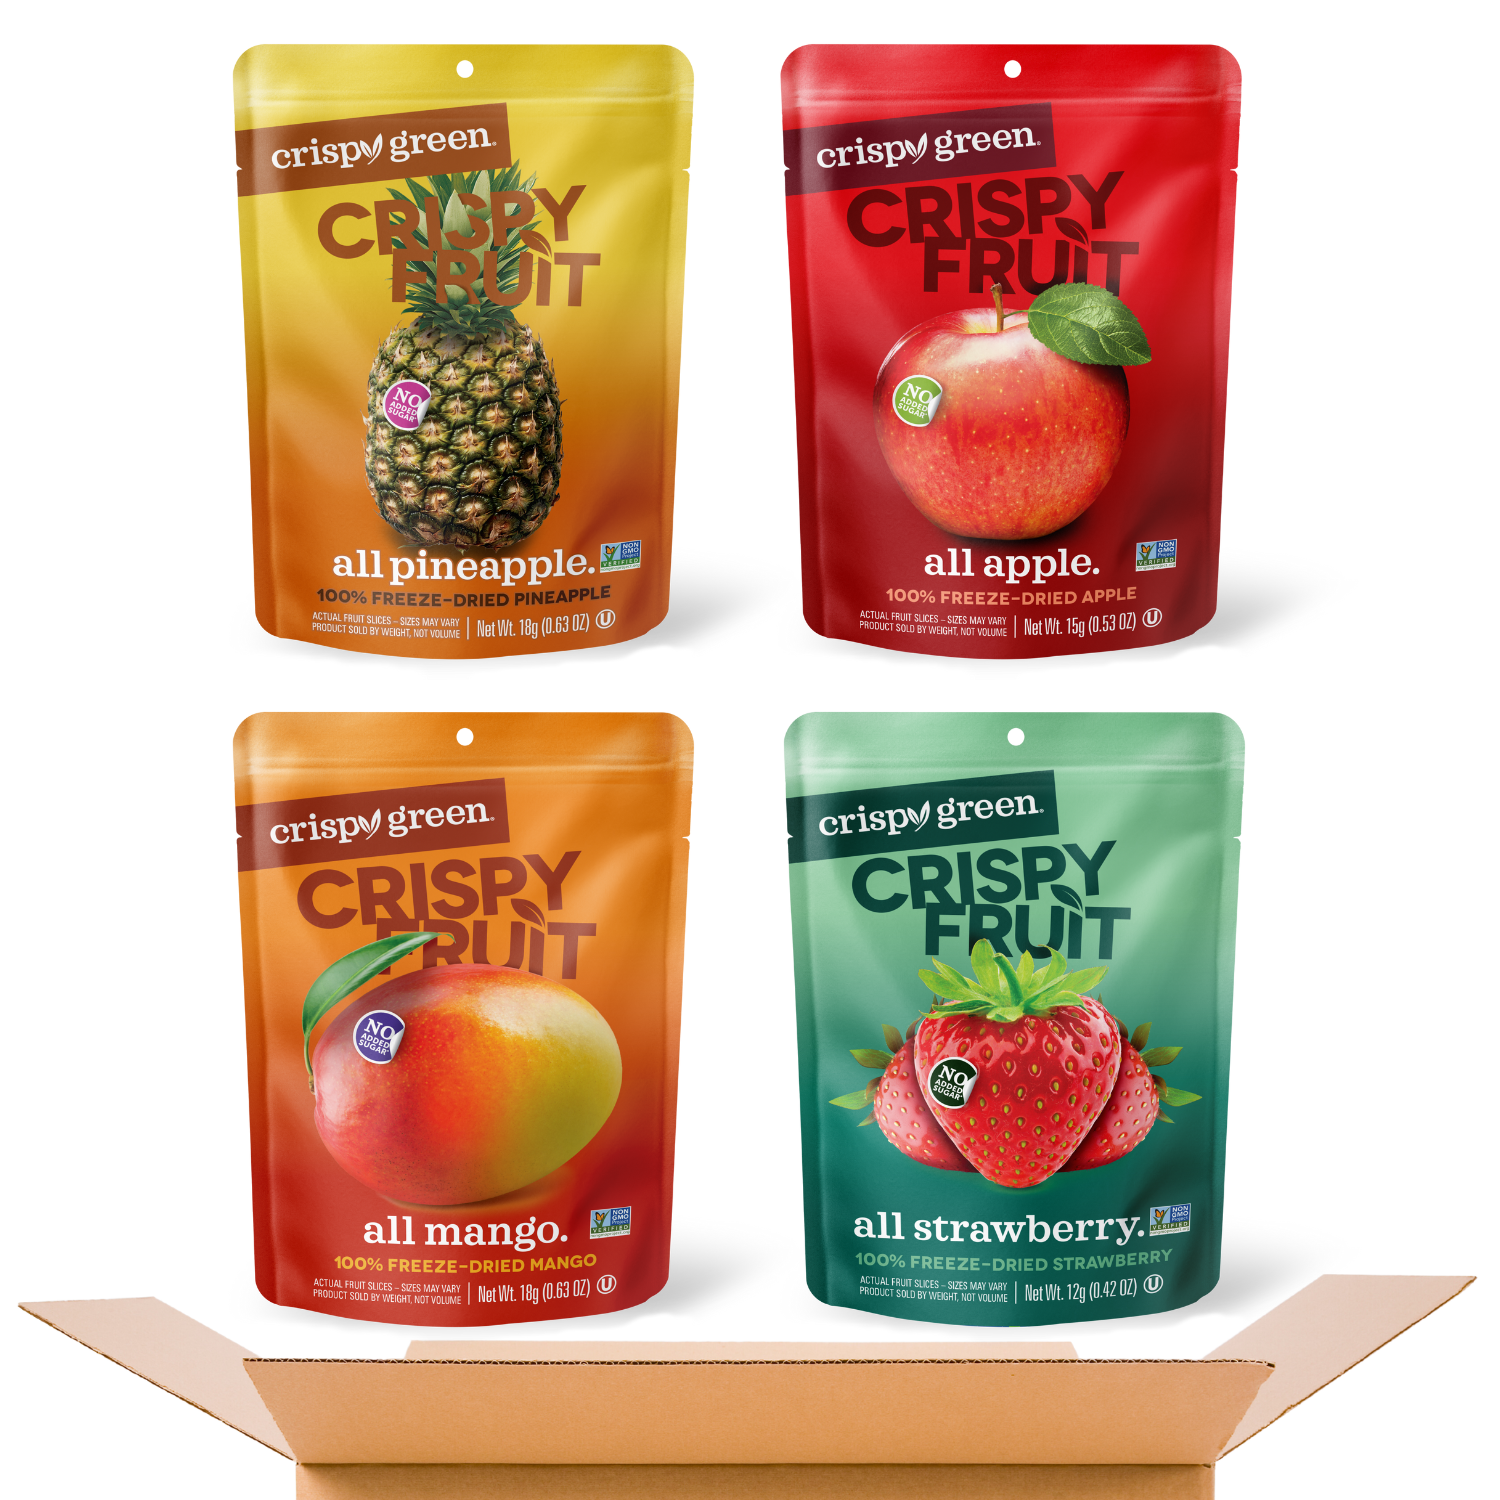 Freeze Dried Multipack: The Variety pack